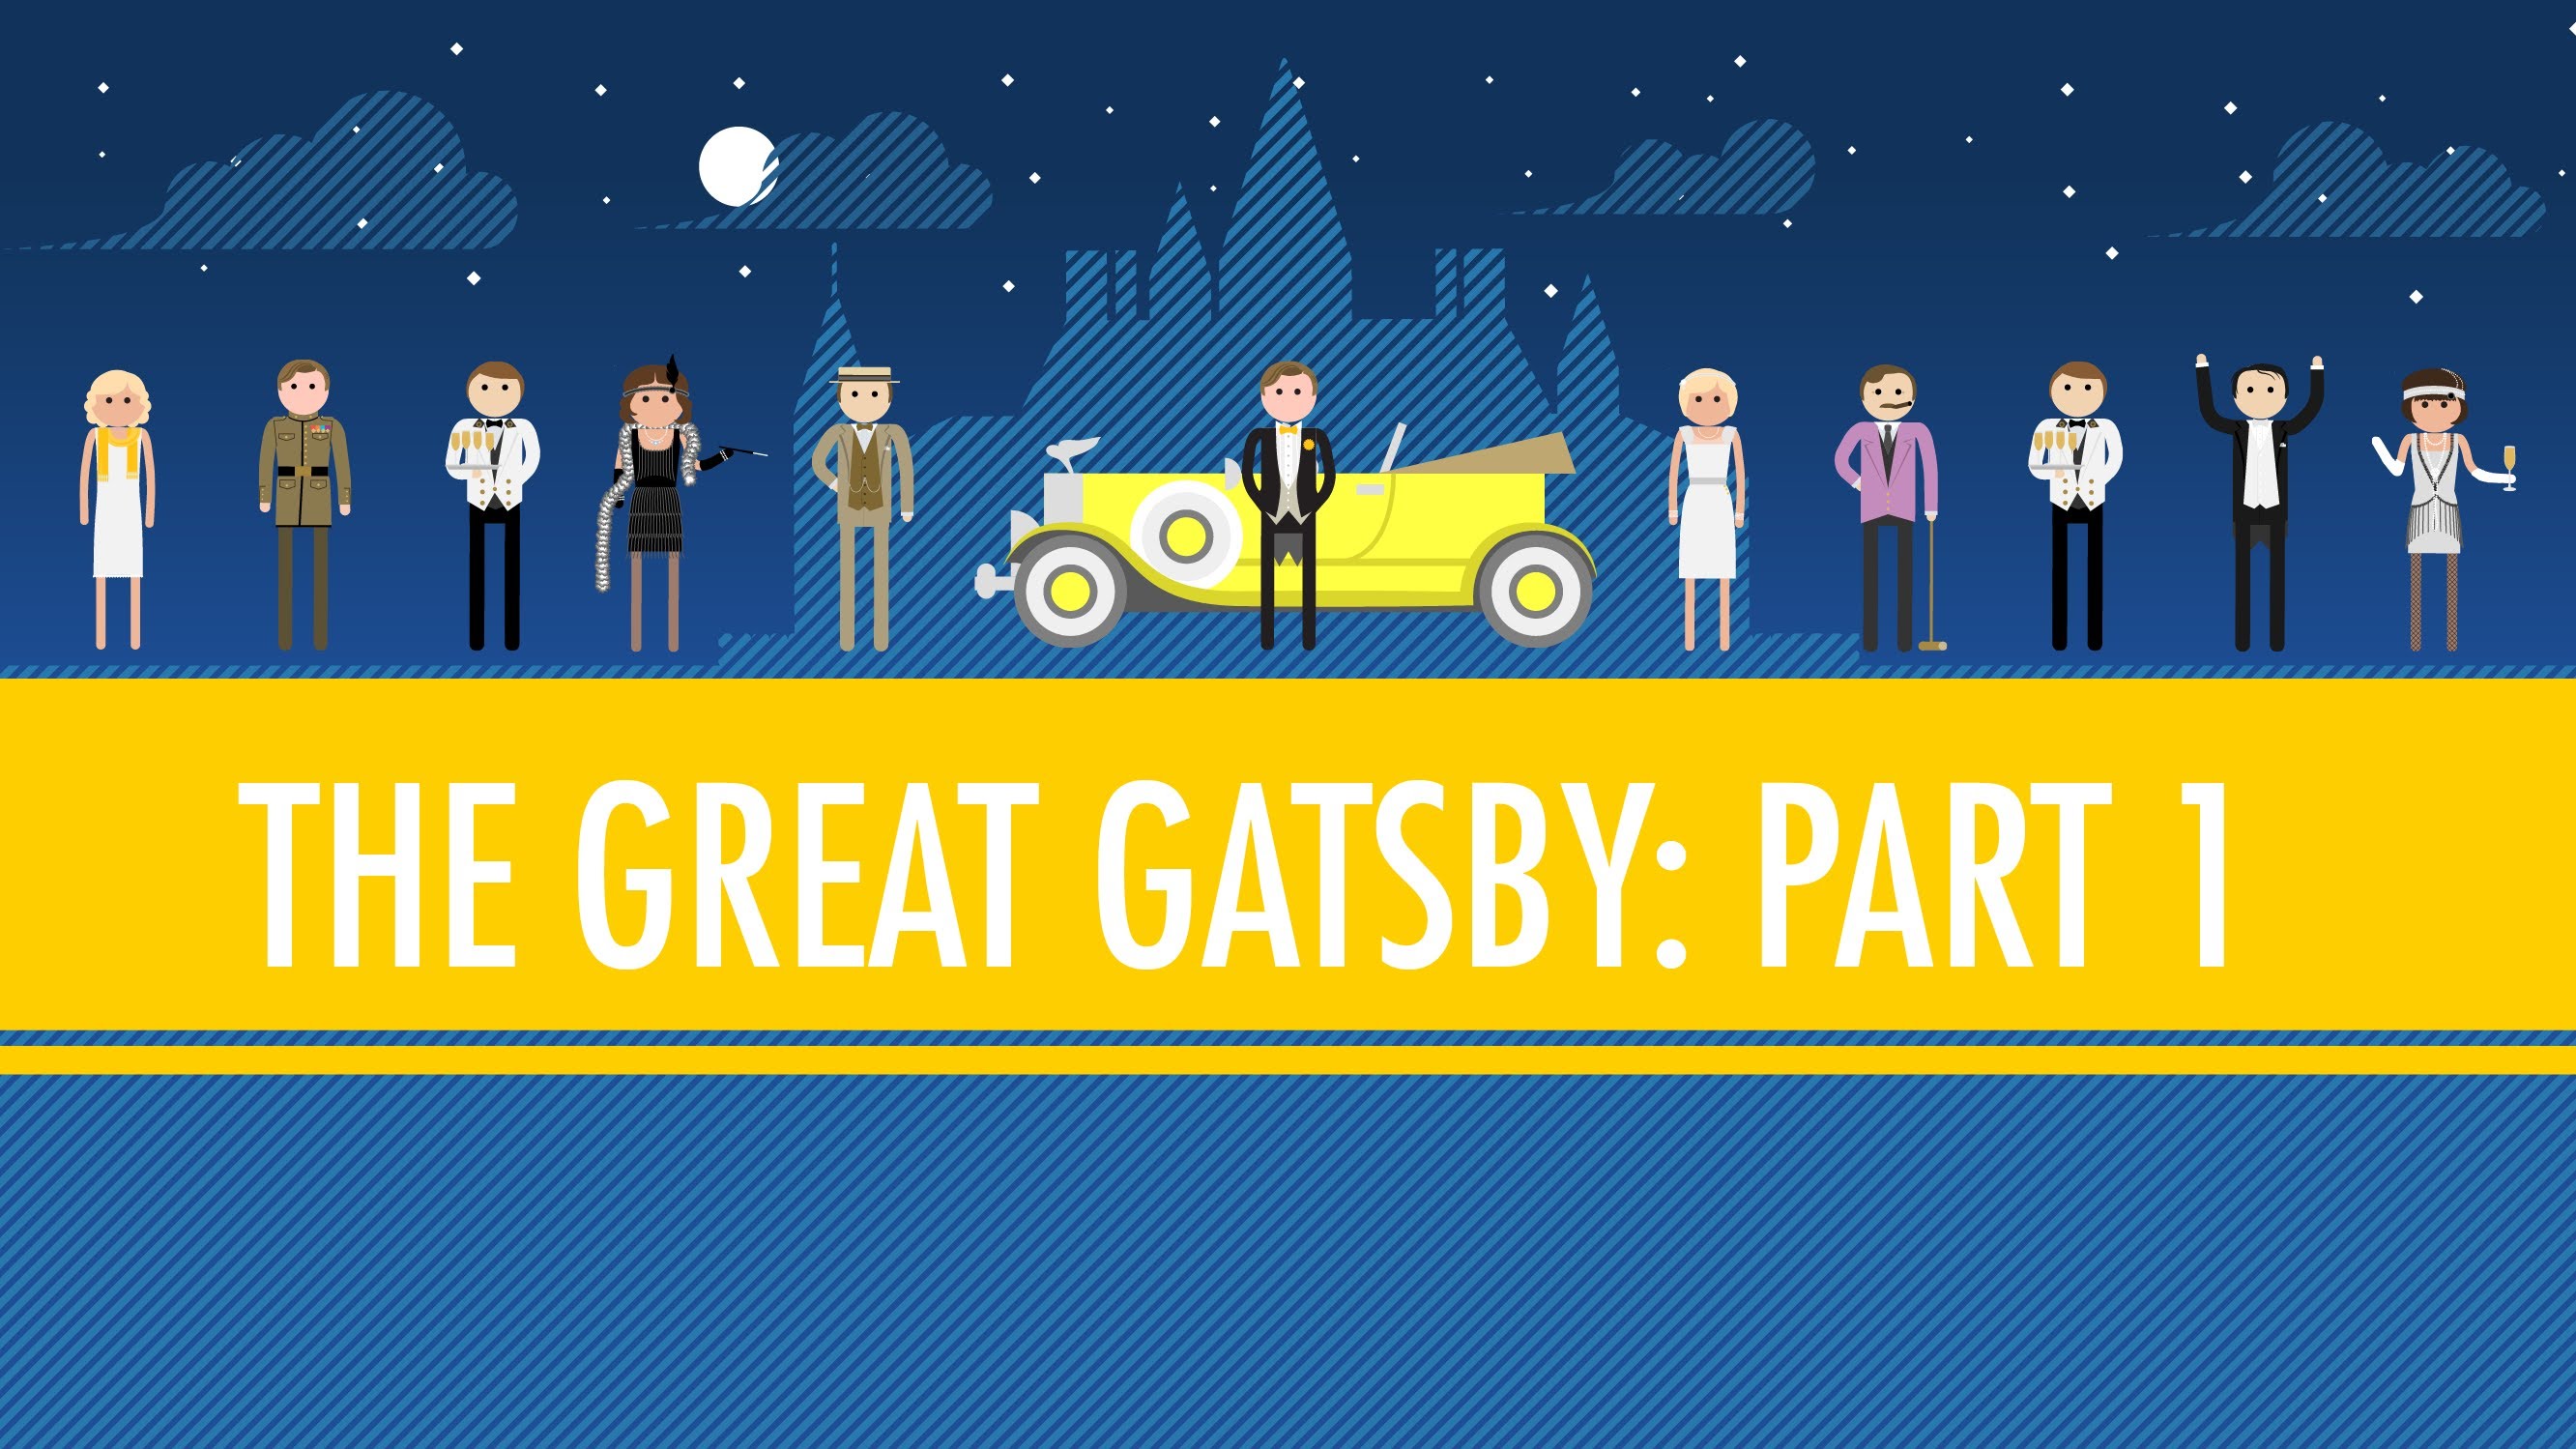 Amazing The Great Gatsby Pictures & Backgrounds